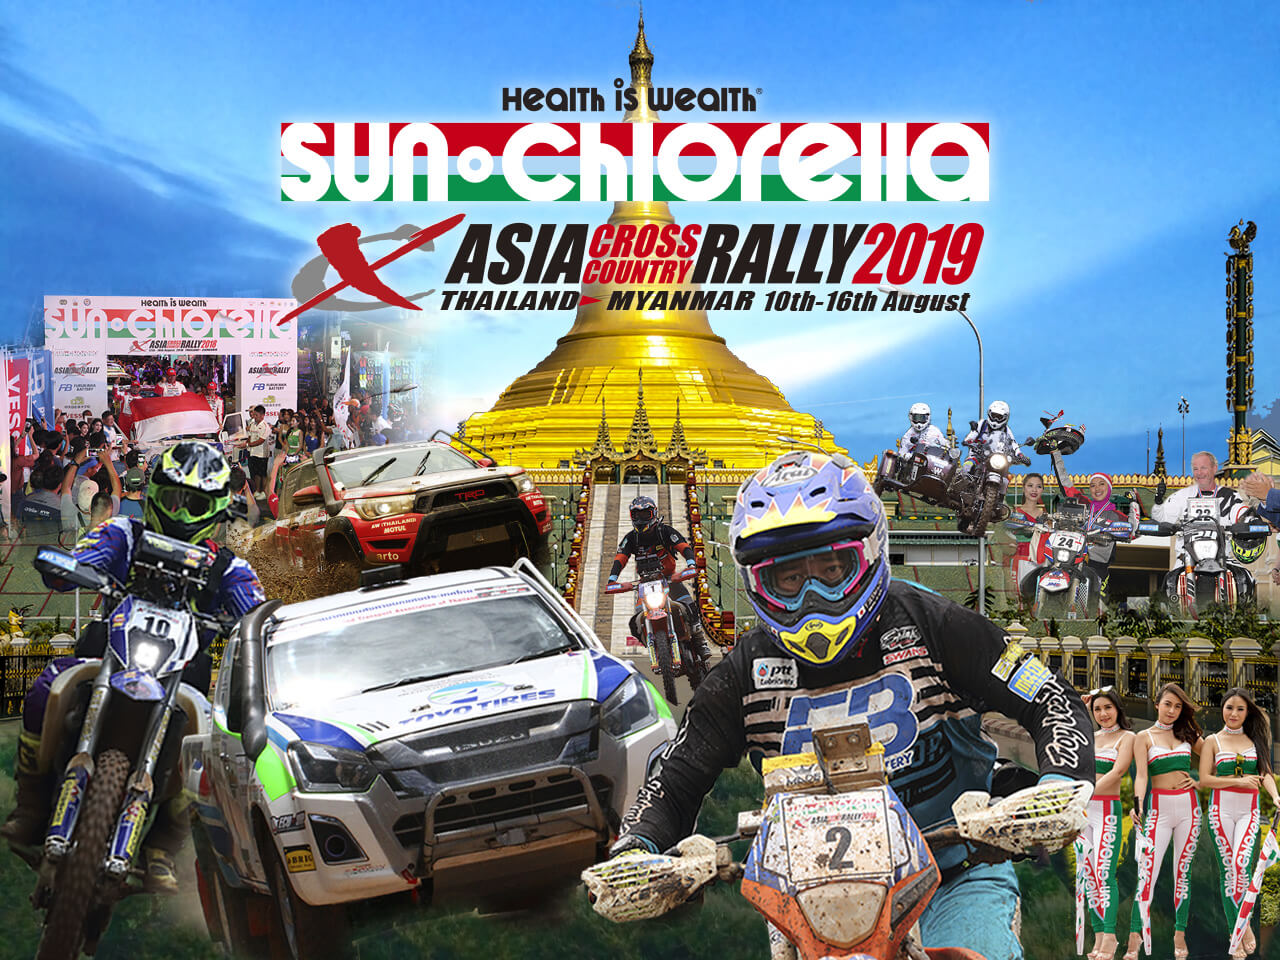 Asia Cross Country Rally 2019